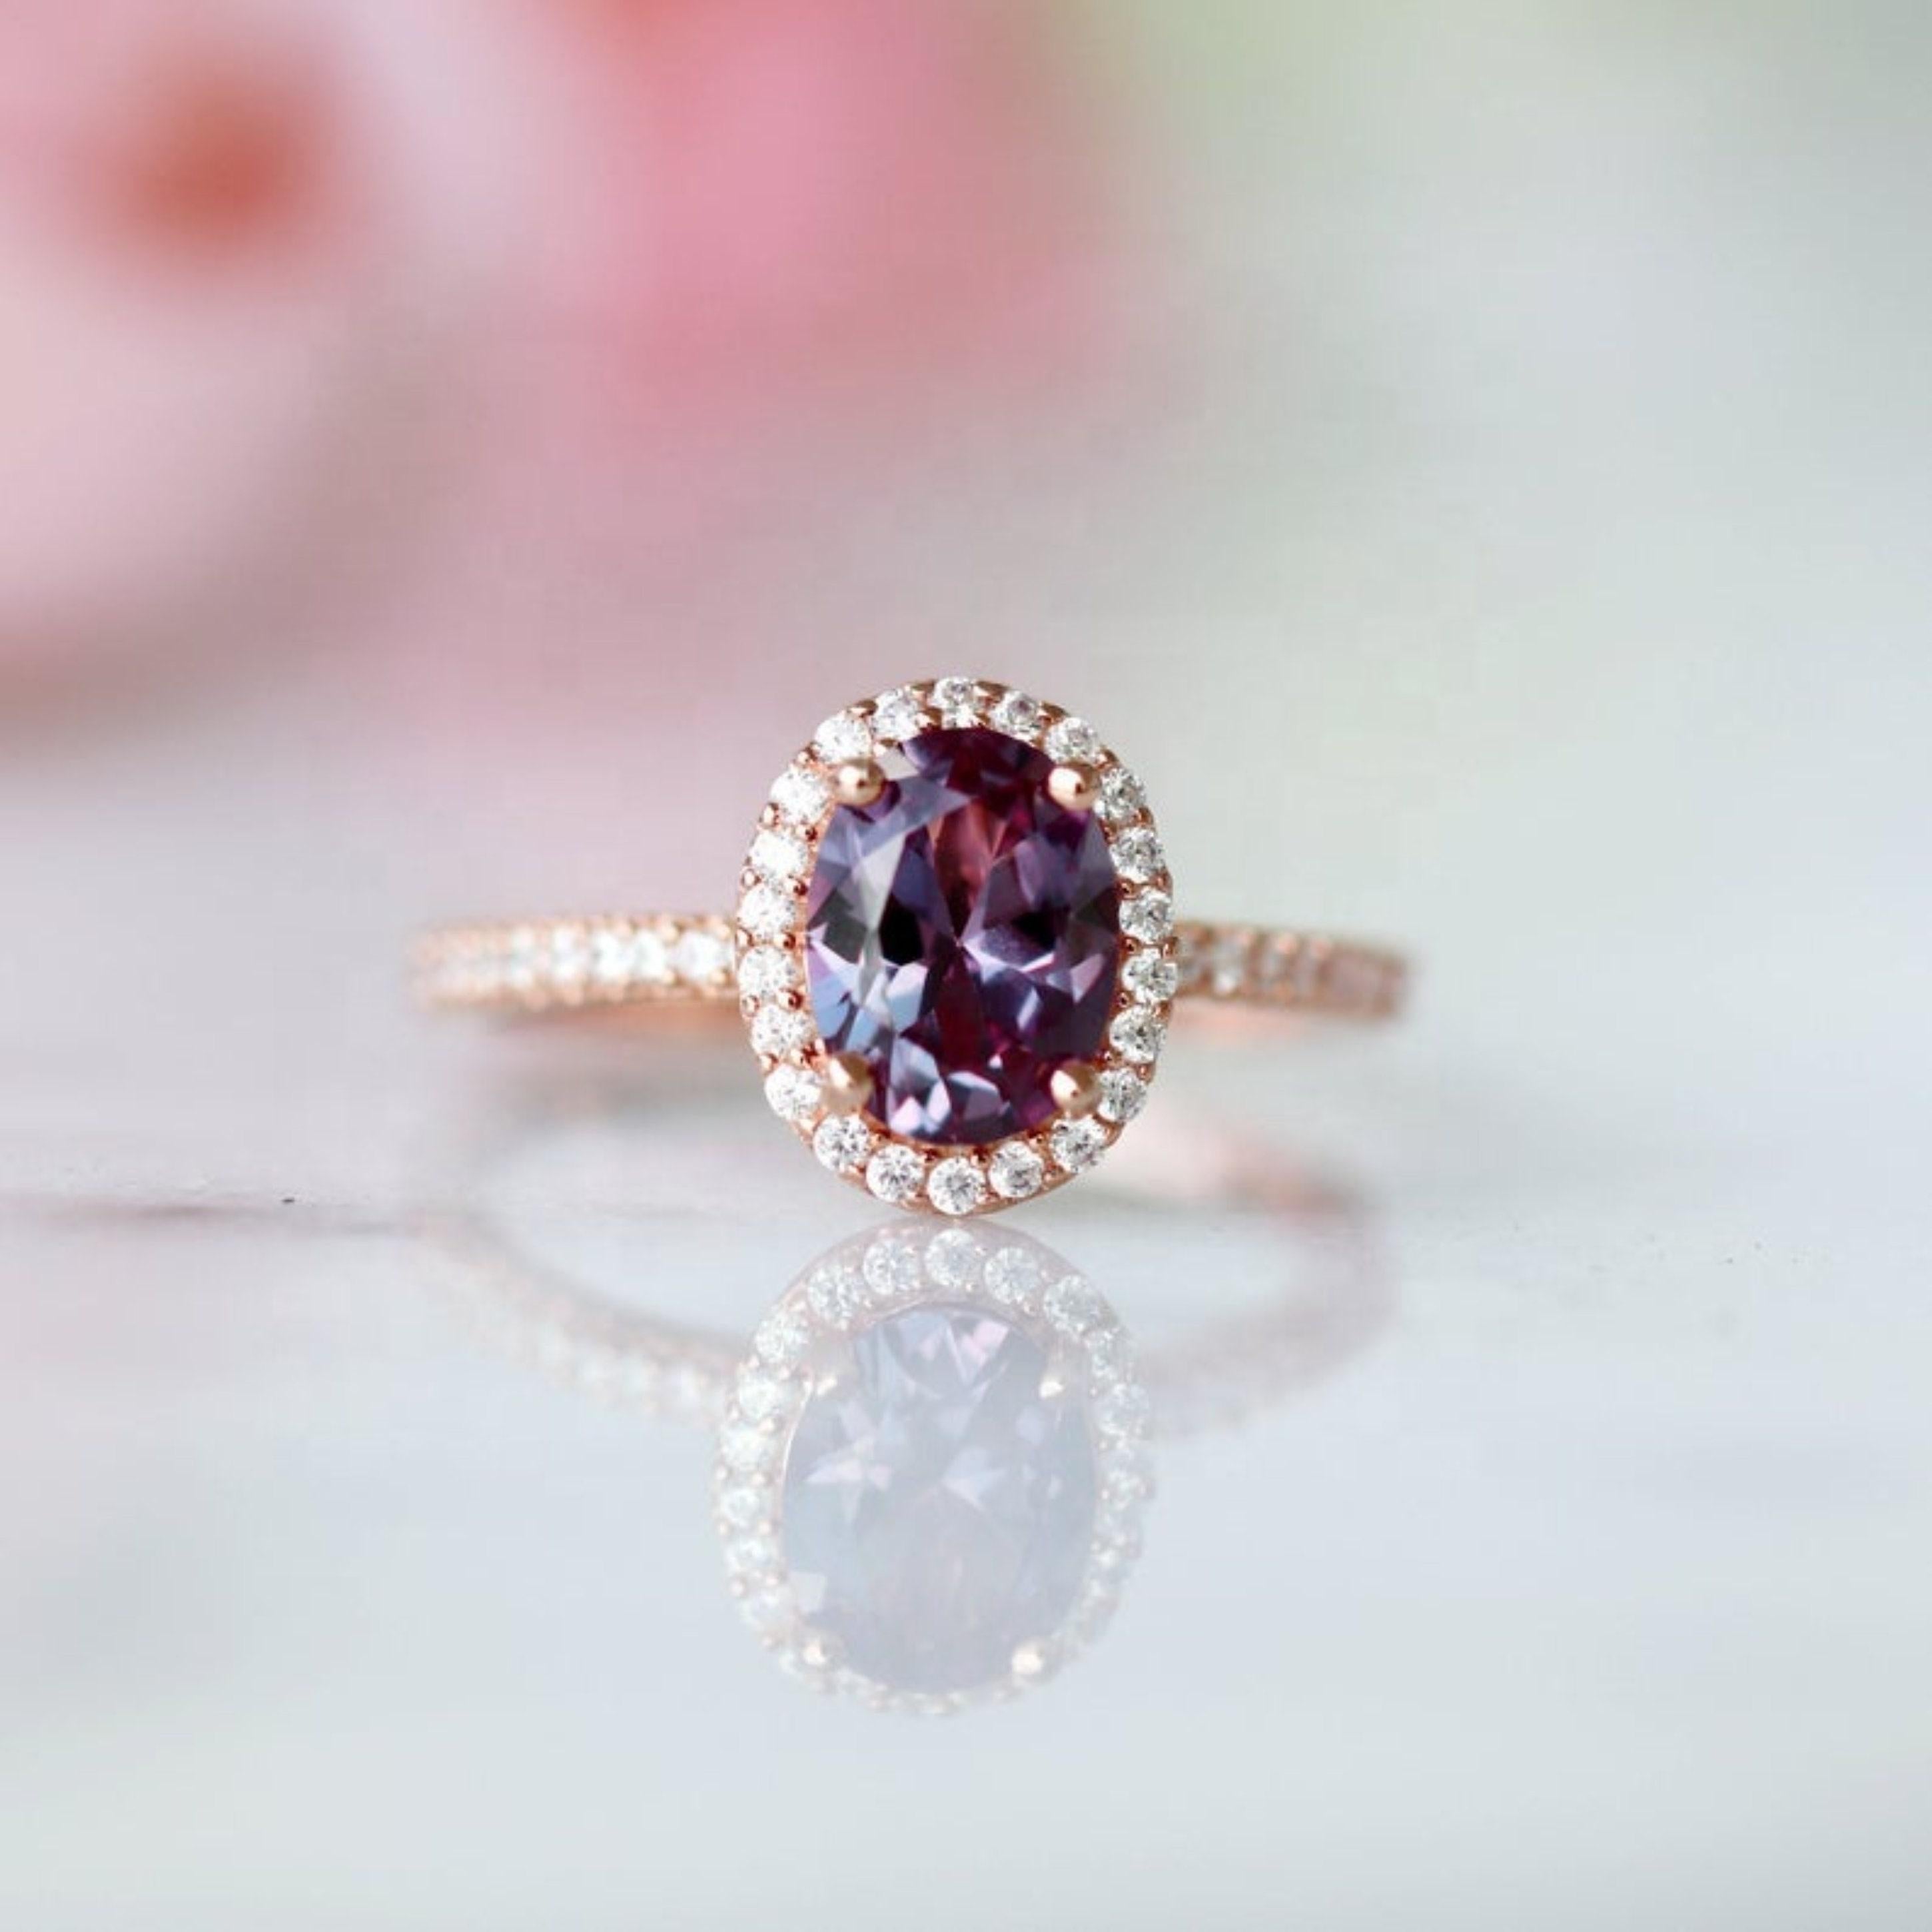 For Sale:  Oval Cut Alexandrite Bridal Wedding Ring, Art Deco Rose Gold Engagement Ring  5